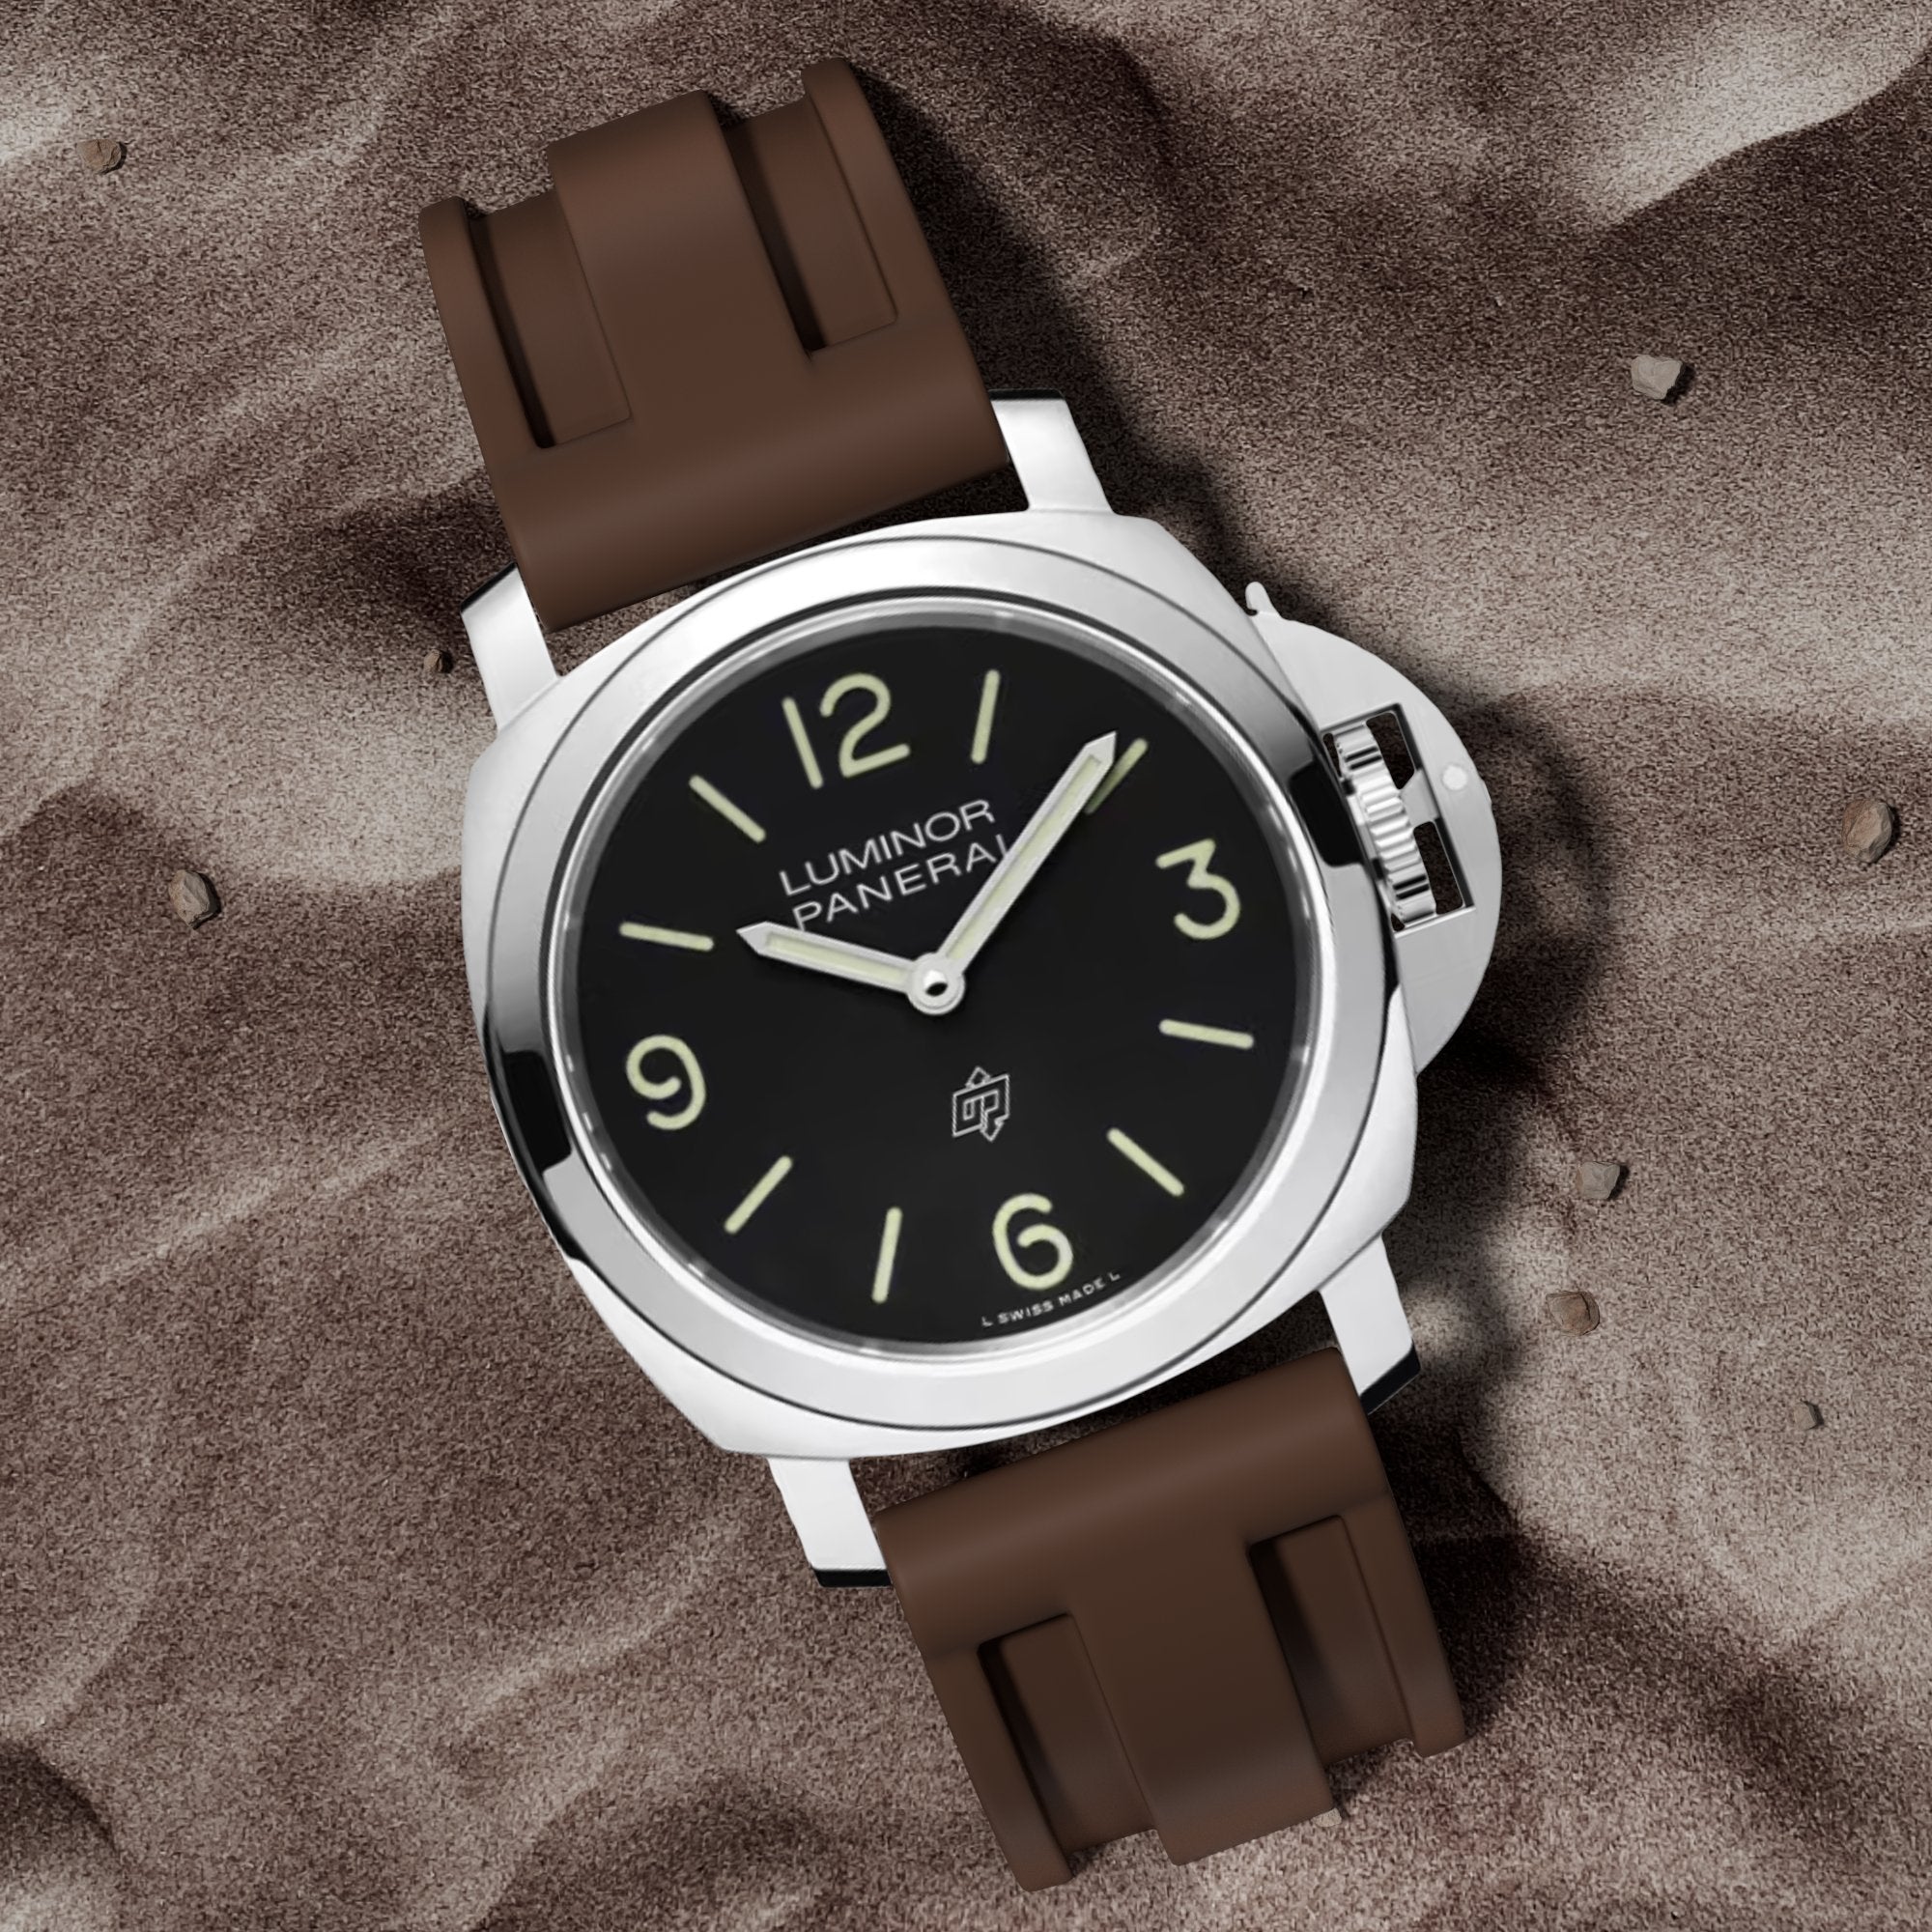 Pinnacle Premium Silicone Strap - Compatible with Panerai - Brown (2420 | LSR) -Strapseeker